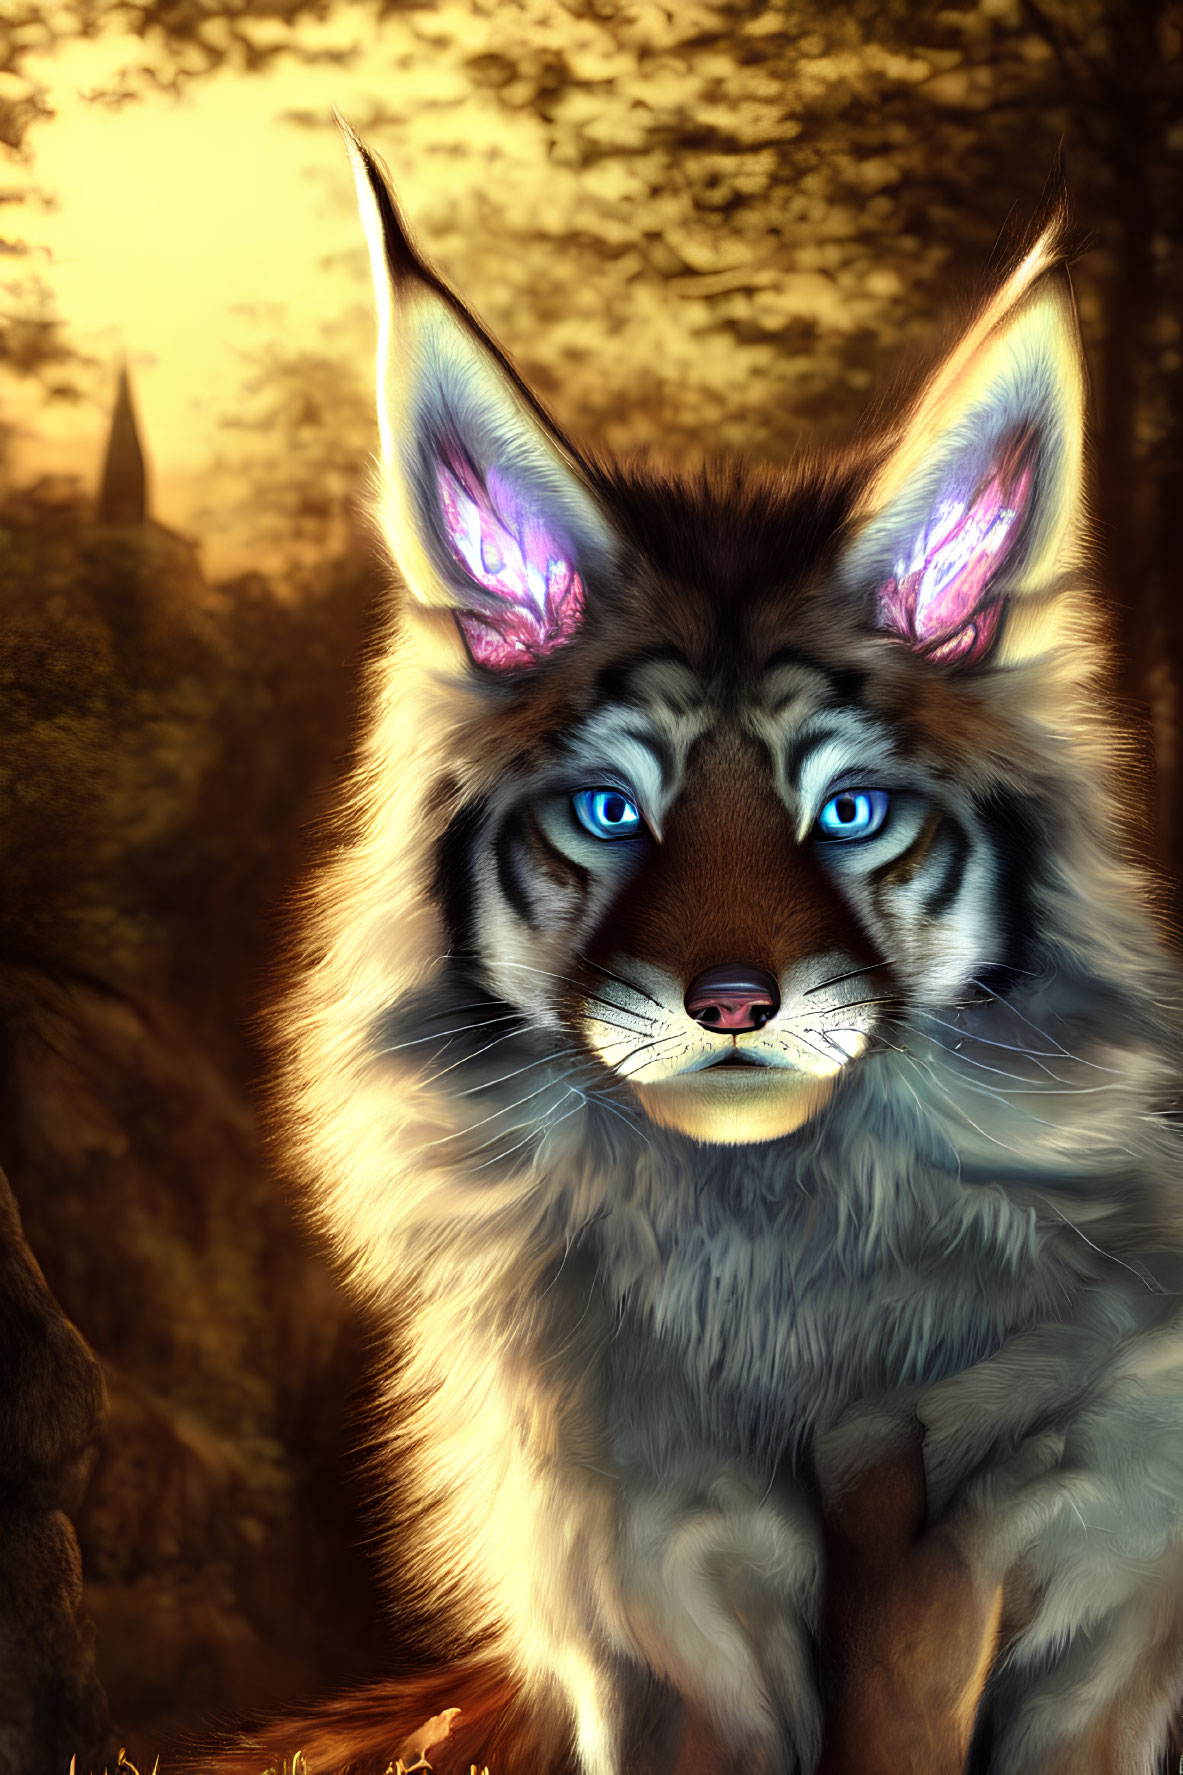 Blue-eyed anthropomorphic feline with intricate markings in autumn forest scene